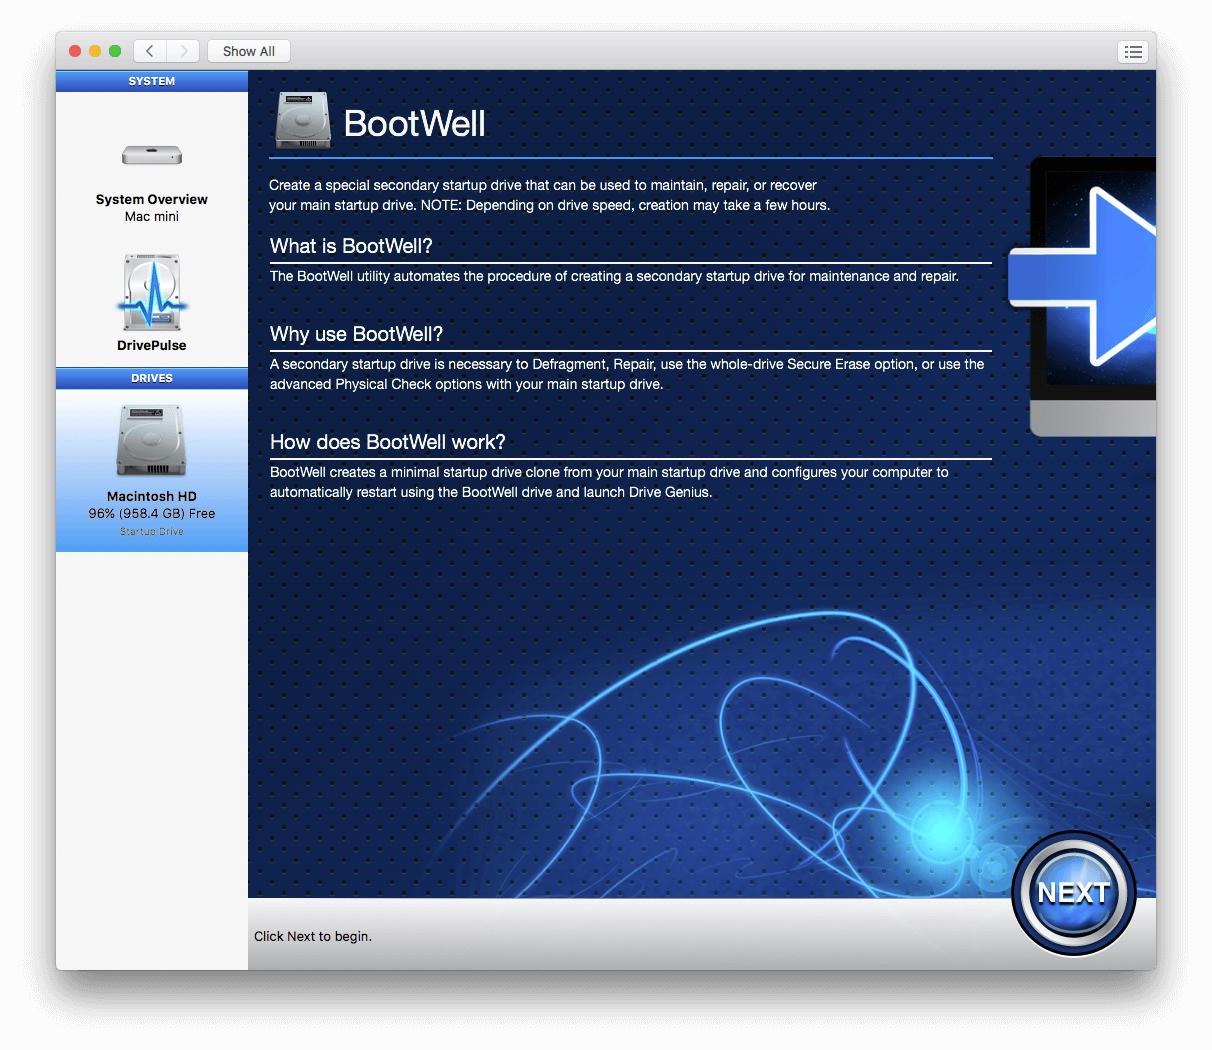 The Bootwell info within Drive Genius.